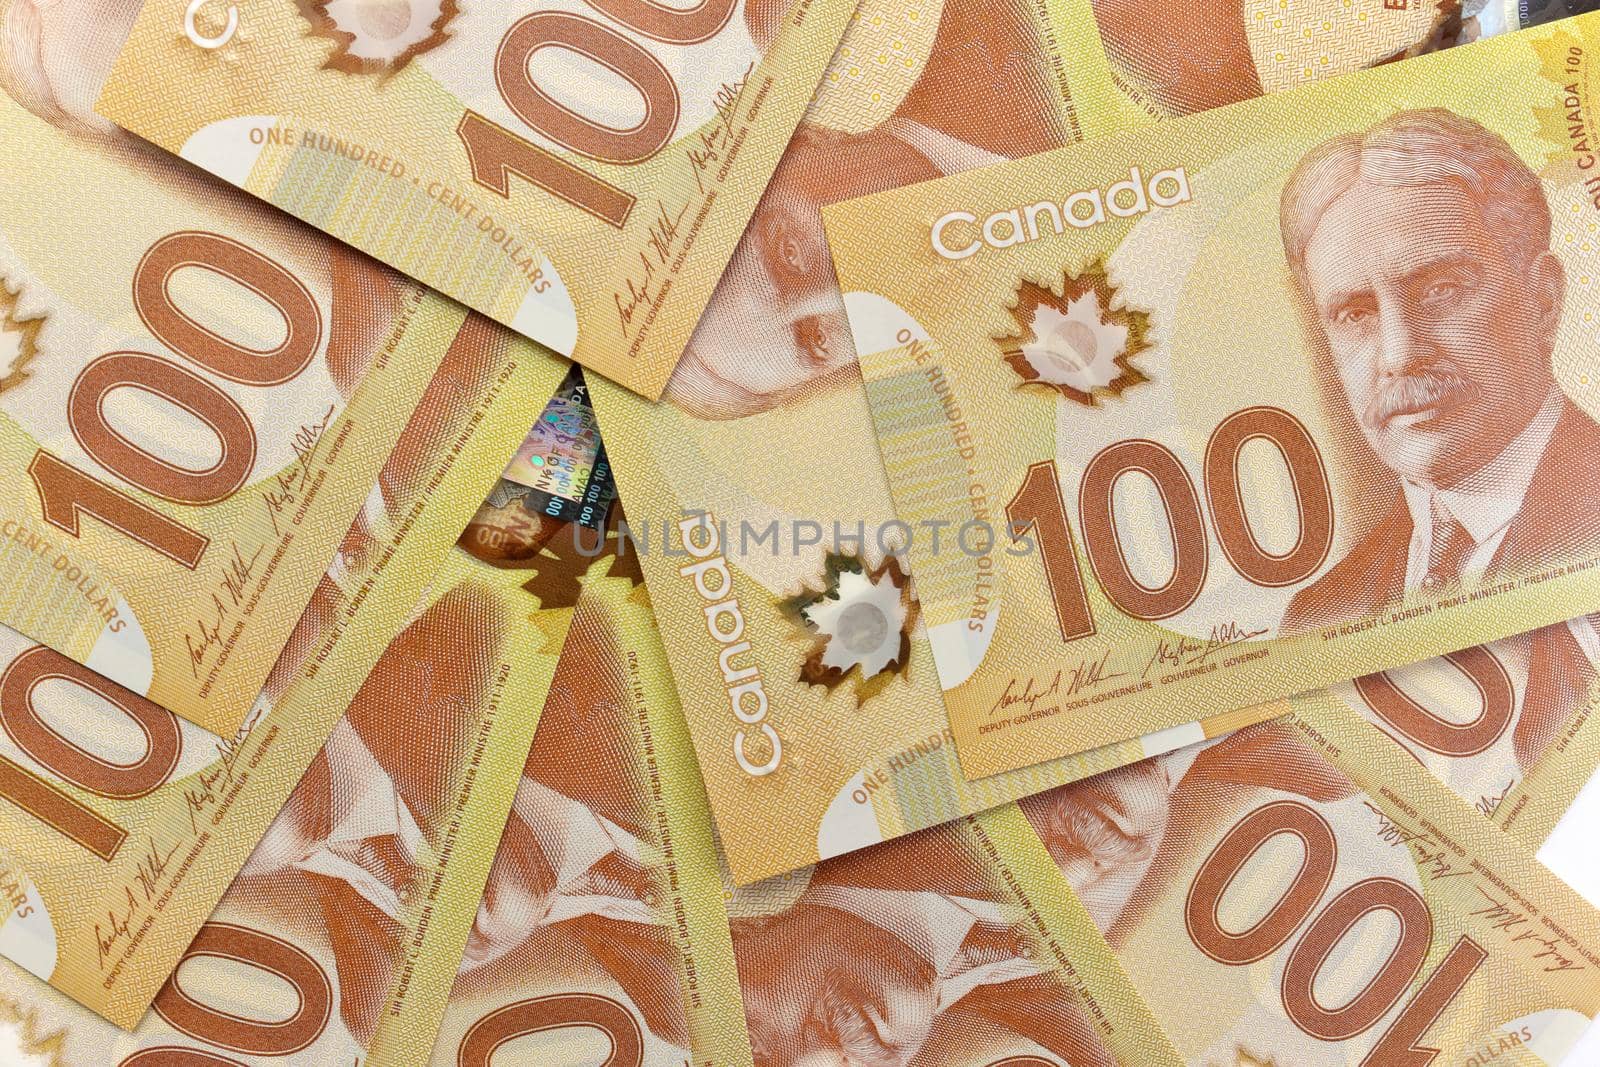 A Directly Above Image of Crisp Canadian 100 One Hundred Dollar Bills on a White Background. Banknotes are piled randomly on top of each other. Plenty of White Copy Space on Frame Right. High quality photo